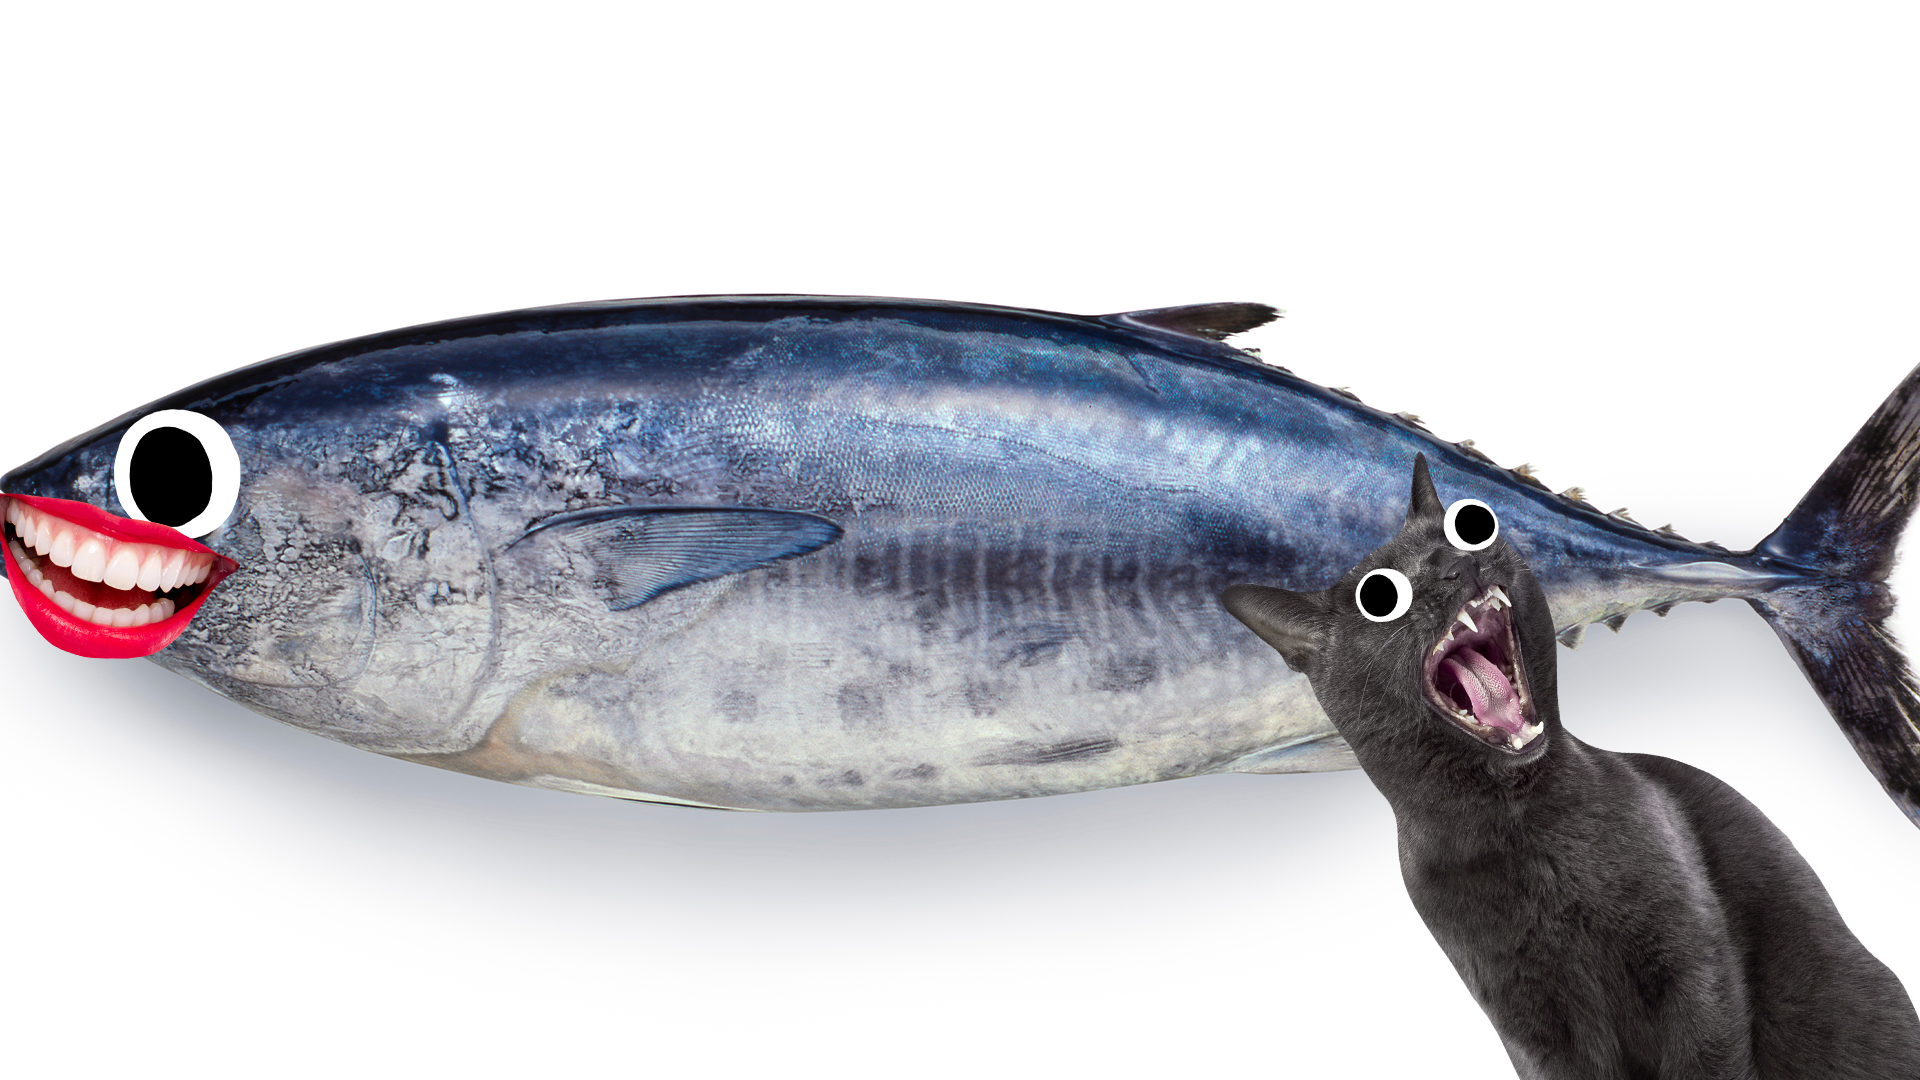 Fish with derpy face and screaming cat on white background